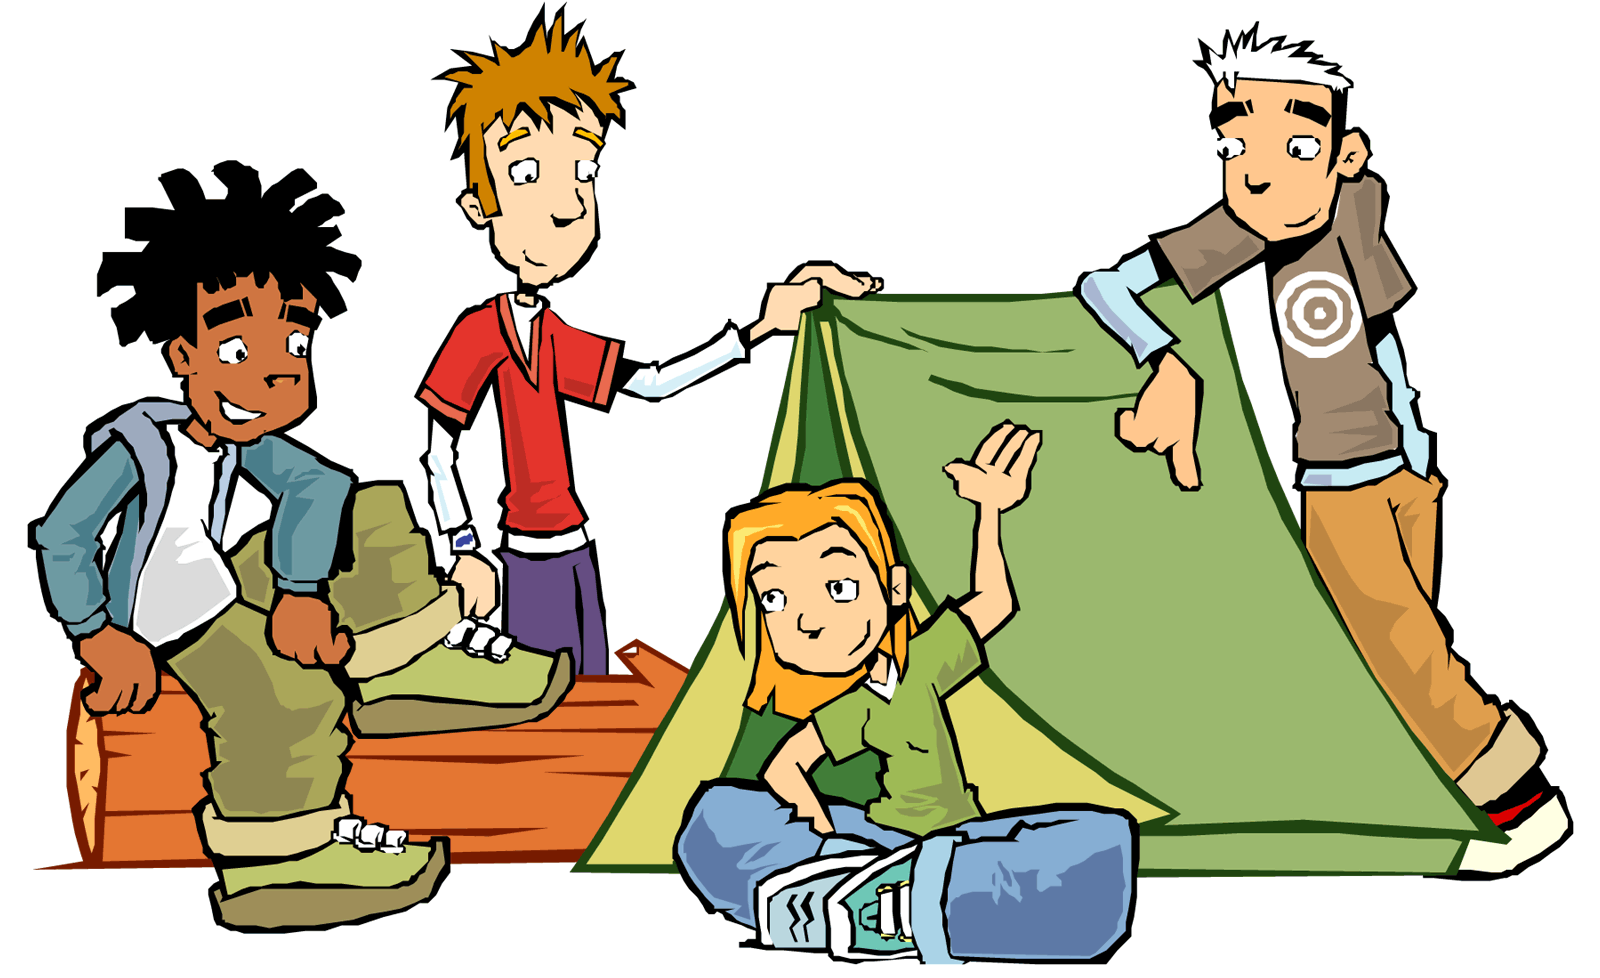 Free Cartoon Camping Pictures, Download Free Cartoon Camping Pictures